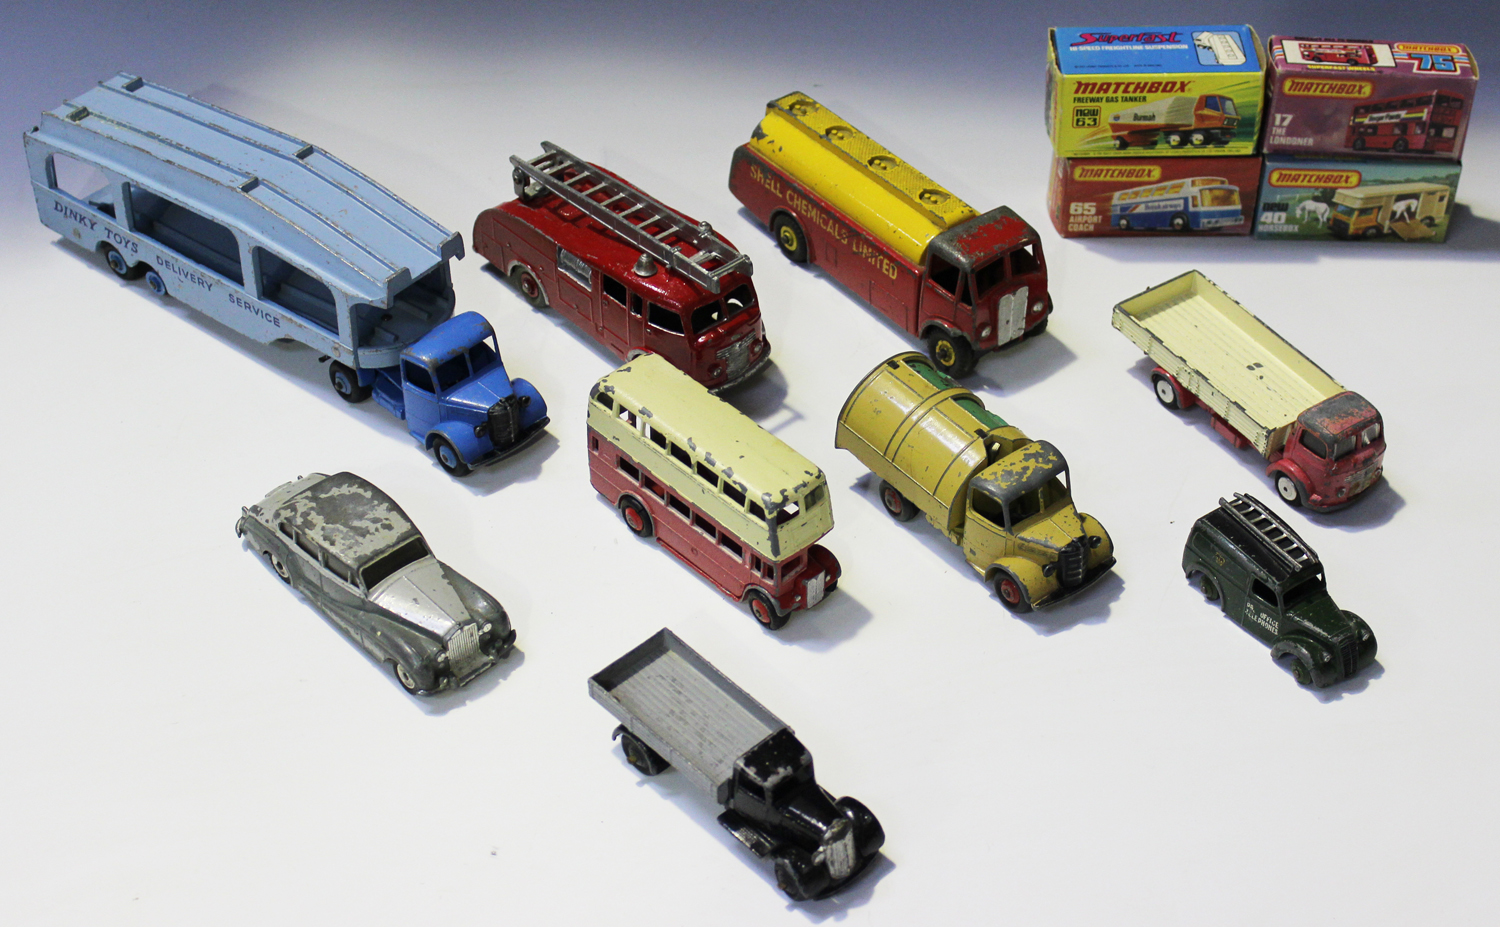 A small collection of Dinky Toys vehicles, including a No. 582 Pullmore car transporter, a No. 25a